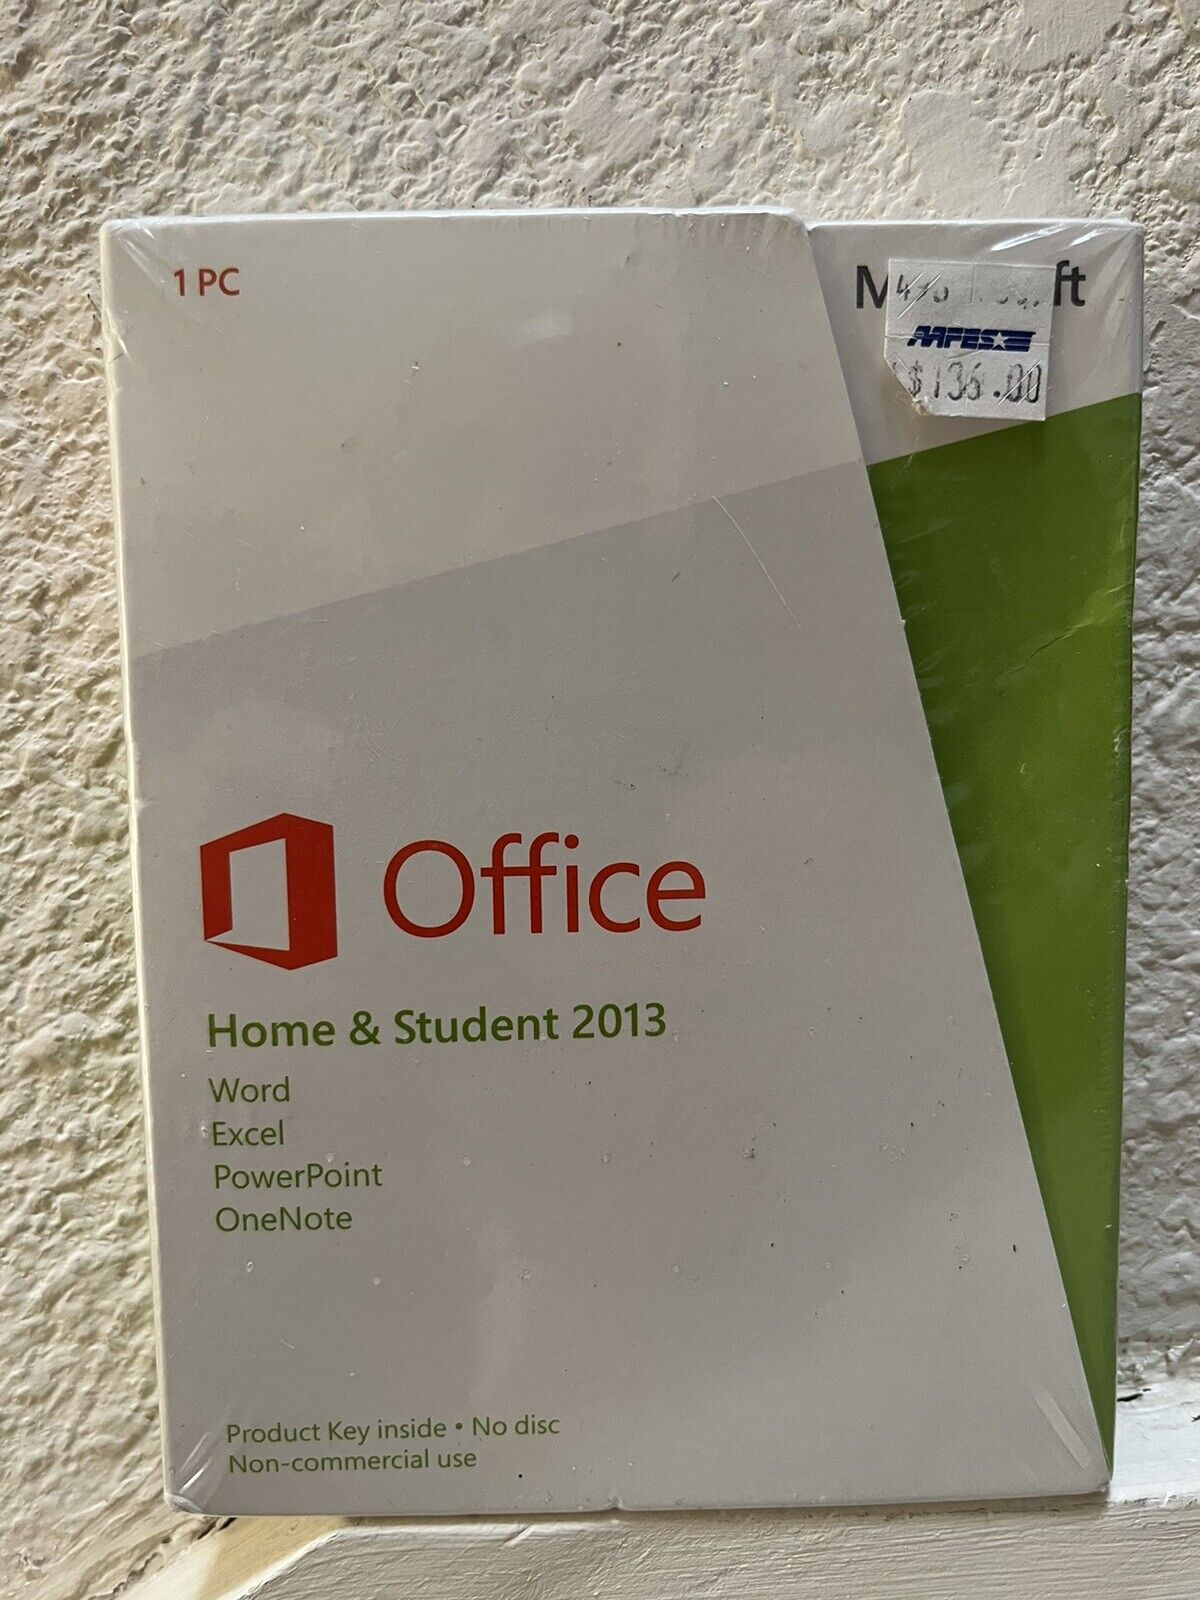 NEW MICROSOFT OFFICE HOME & STUDENT 2013 Word Excel PowerPoint OneNote USA CAN